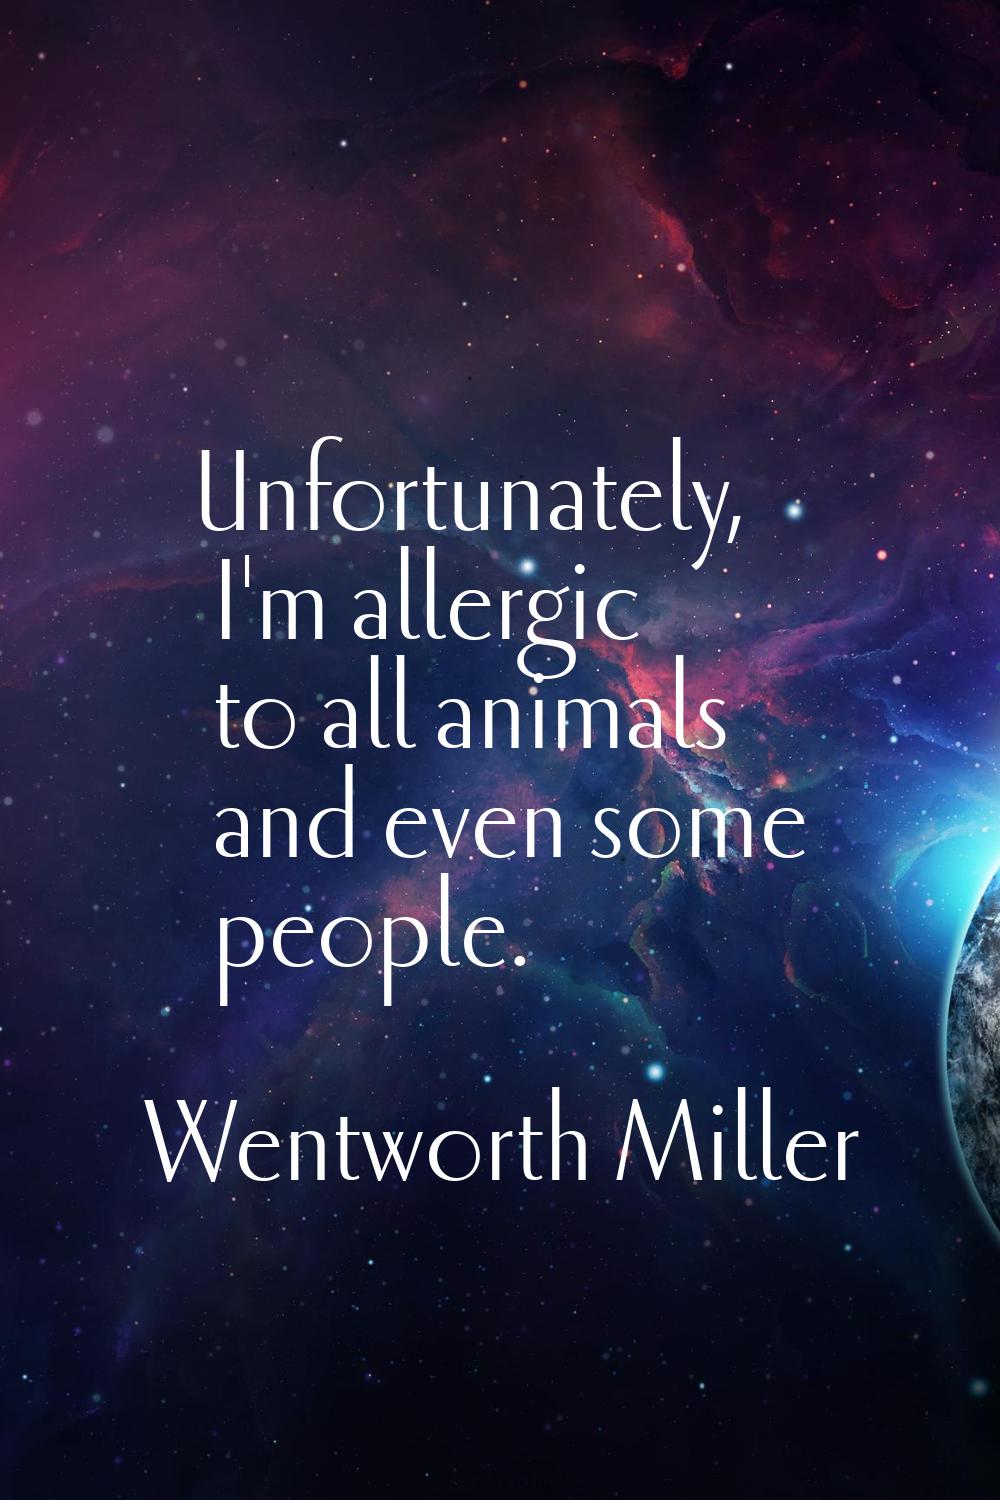 Unfortunately, I'm allergic to all animals and even some people.